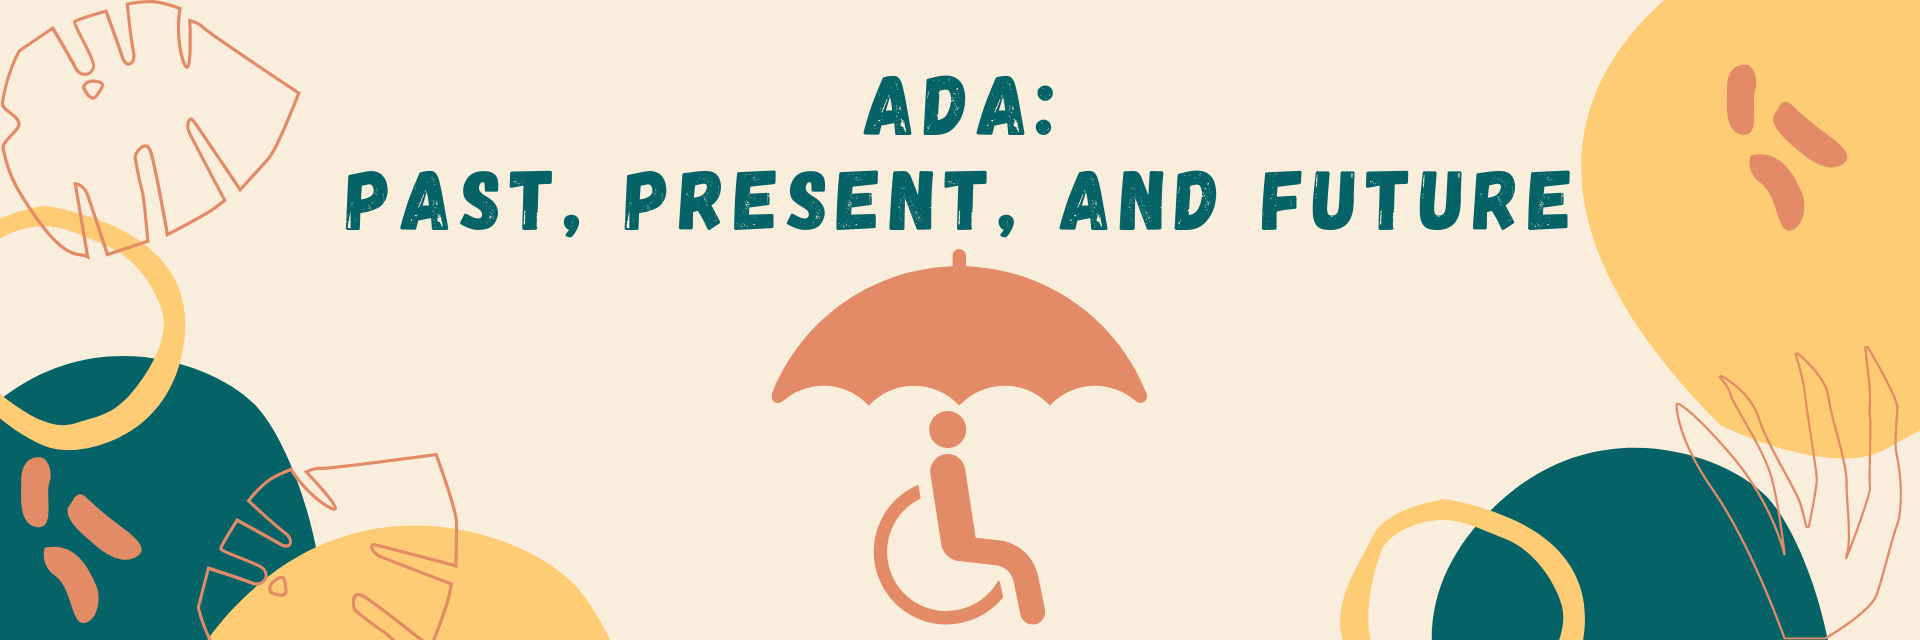 Text "ADA: Past, Present, and Future" Graphic: wheelchair logo with umbrella above